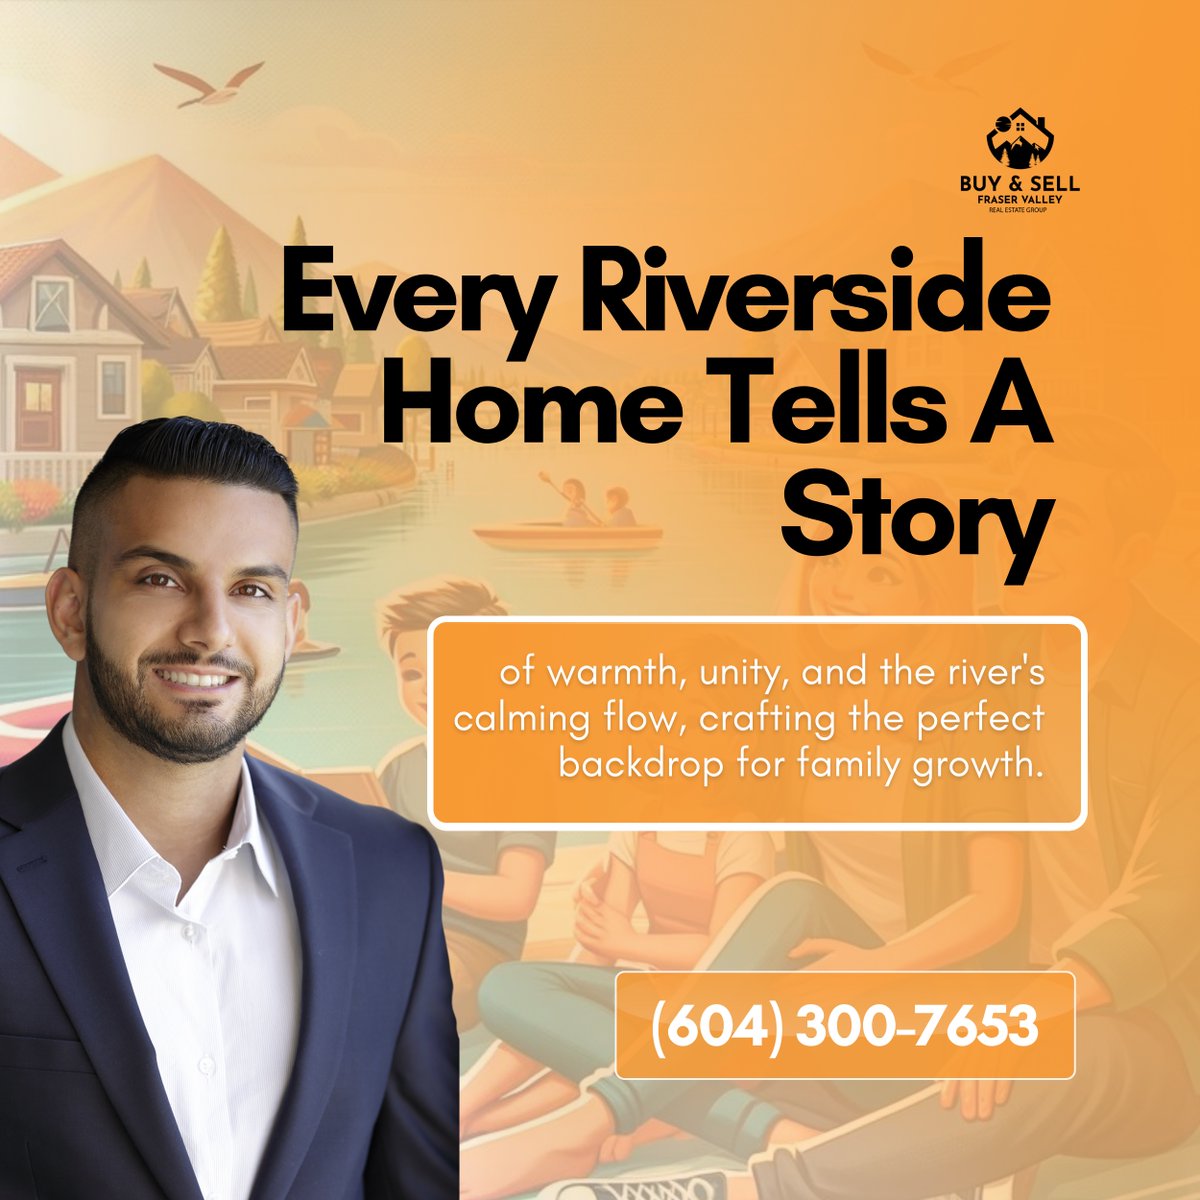 Discover the unique story your family can create in a Riverside home. 

Give us a call via (604) 300-7653 to begin your journey to a place where every moment becomes a cherished memory. 

#RiversideLiving #FamilyHome #RealEstateJourney 
#FraserValleyHomes #CreateMemories #BuyS...